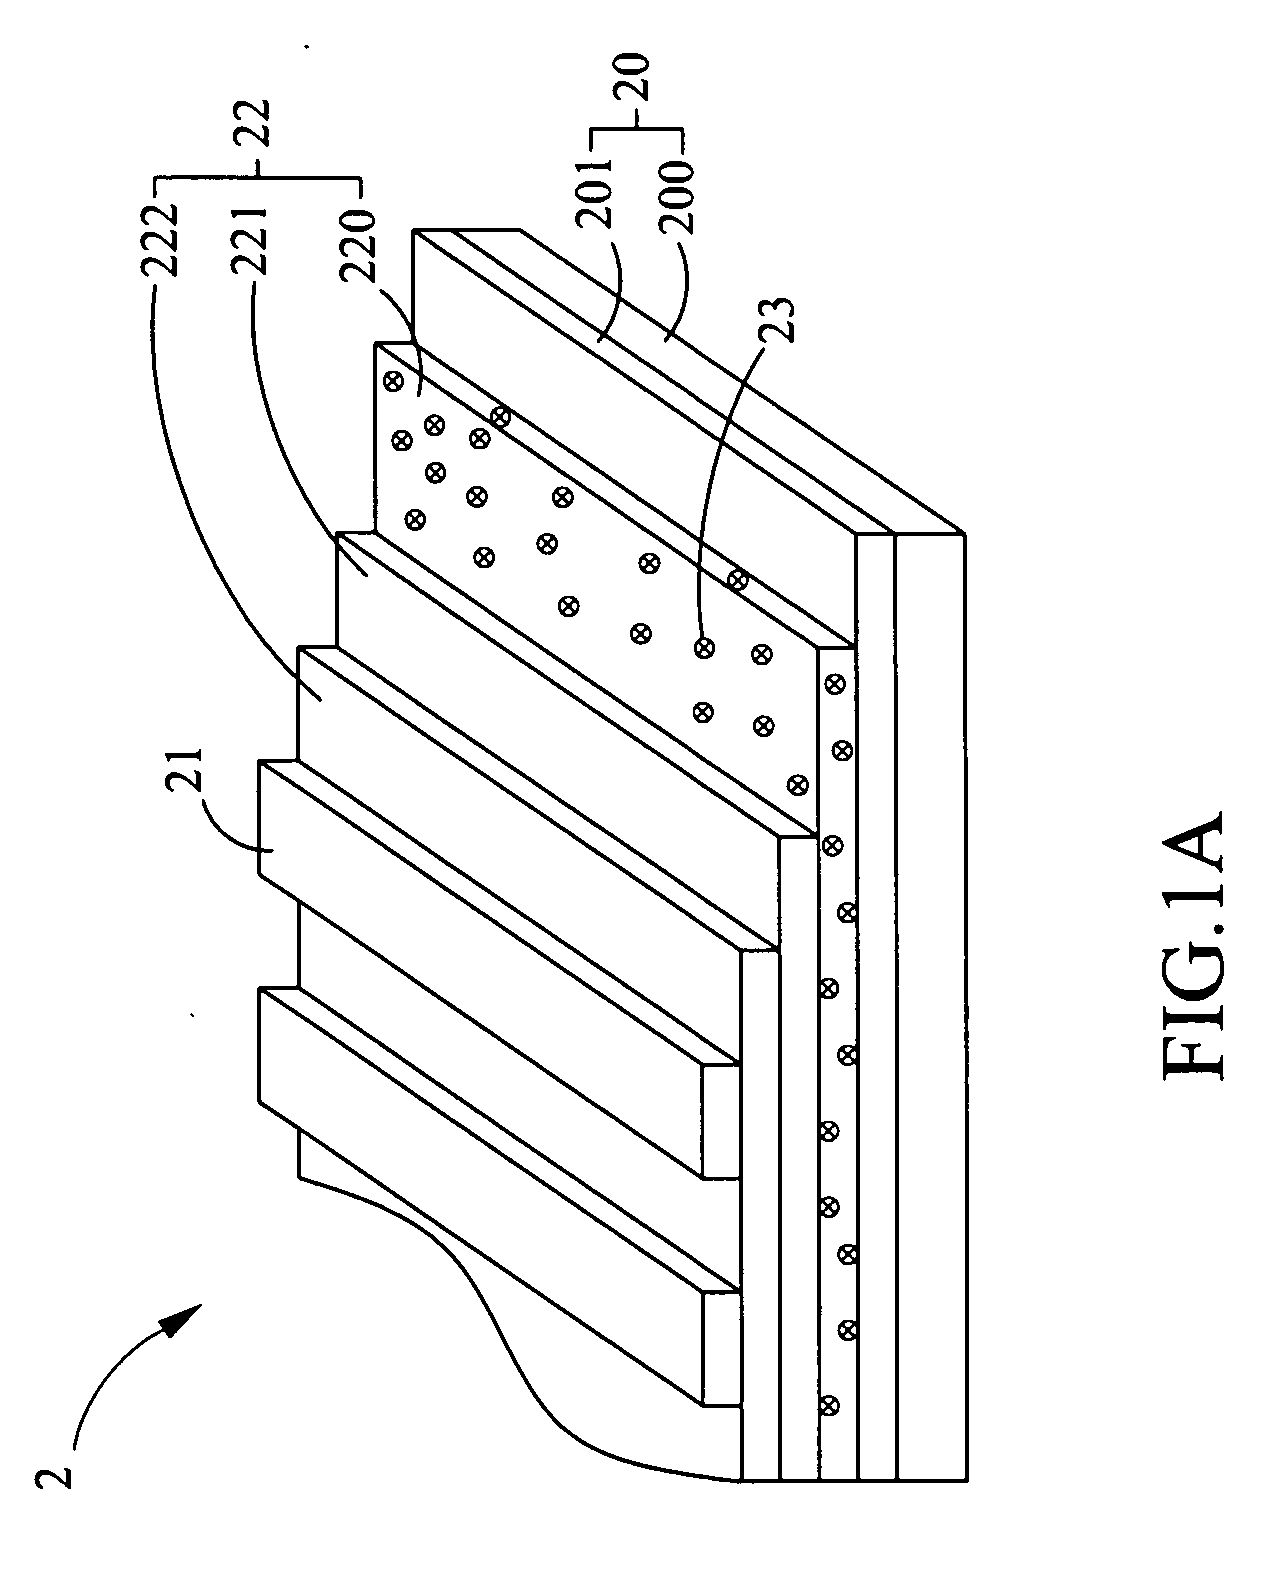 Photovoltaic cell having nanodots and method for forming the same